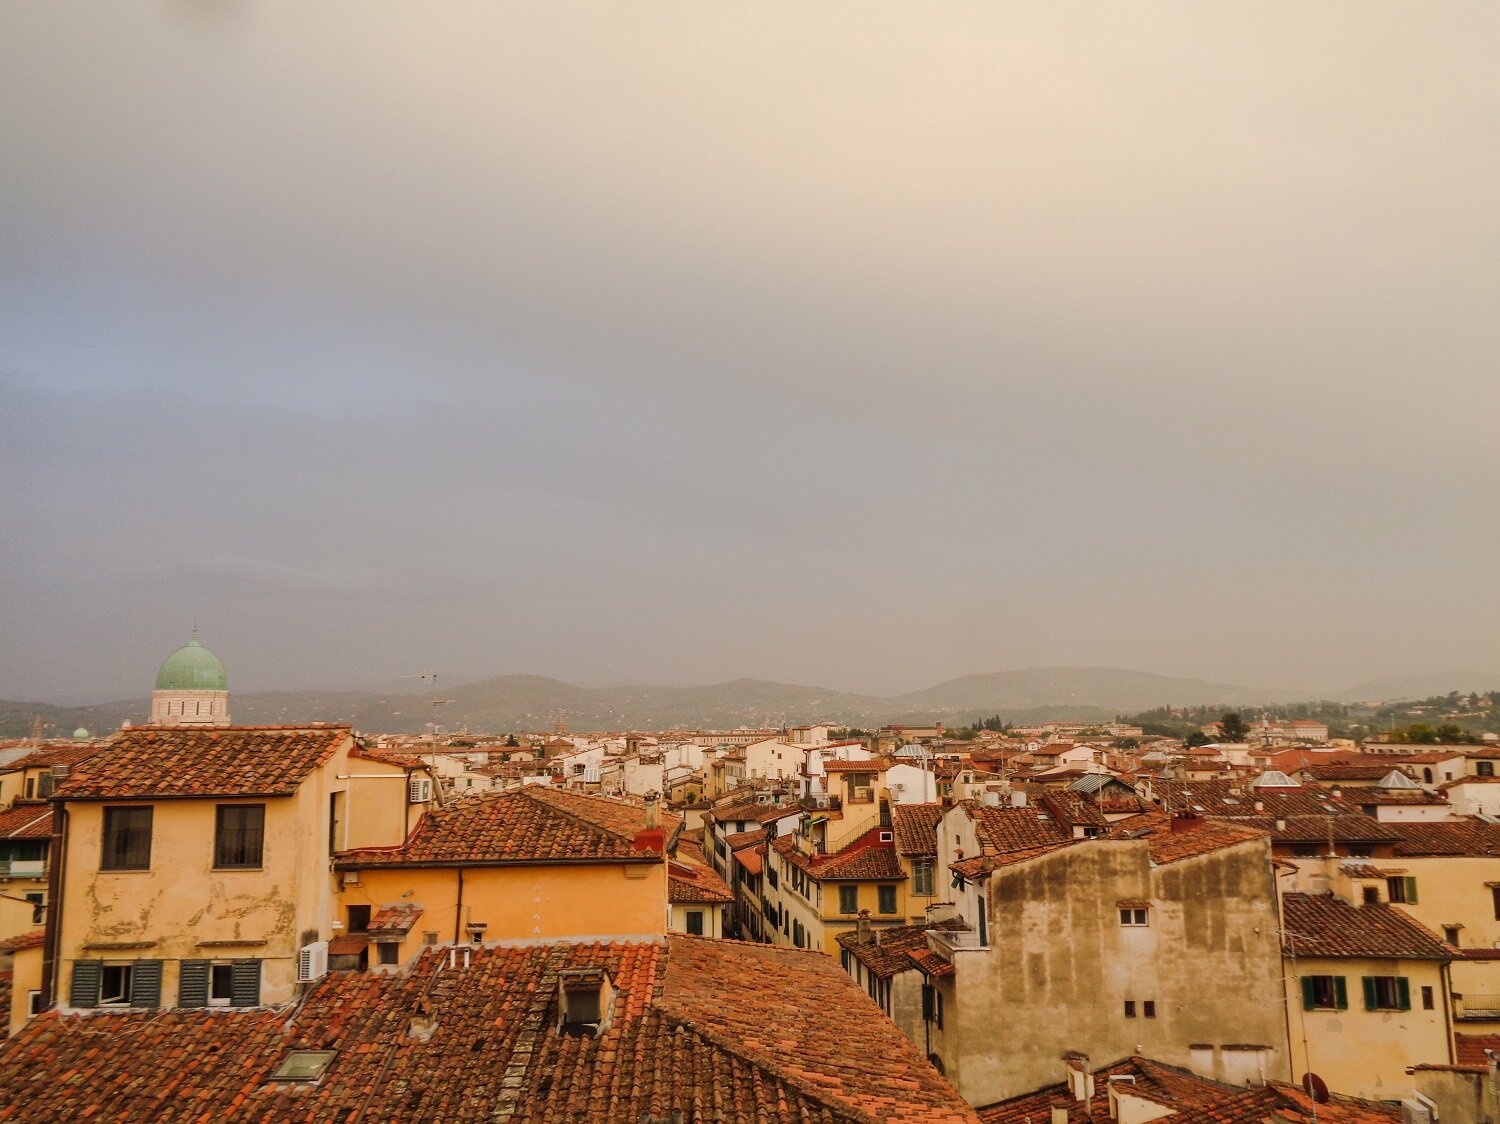  Views of Florence from our B&amp;B, Pallazo Graziani | Blooming Magnolias Blog | Travel, Florence, Italy 